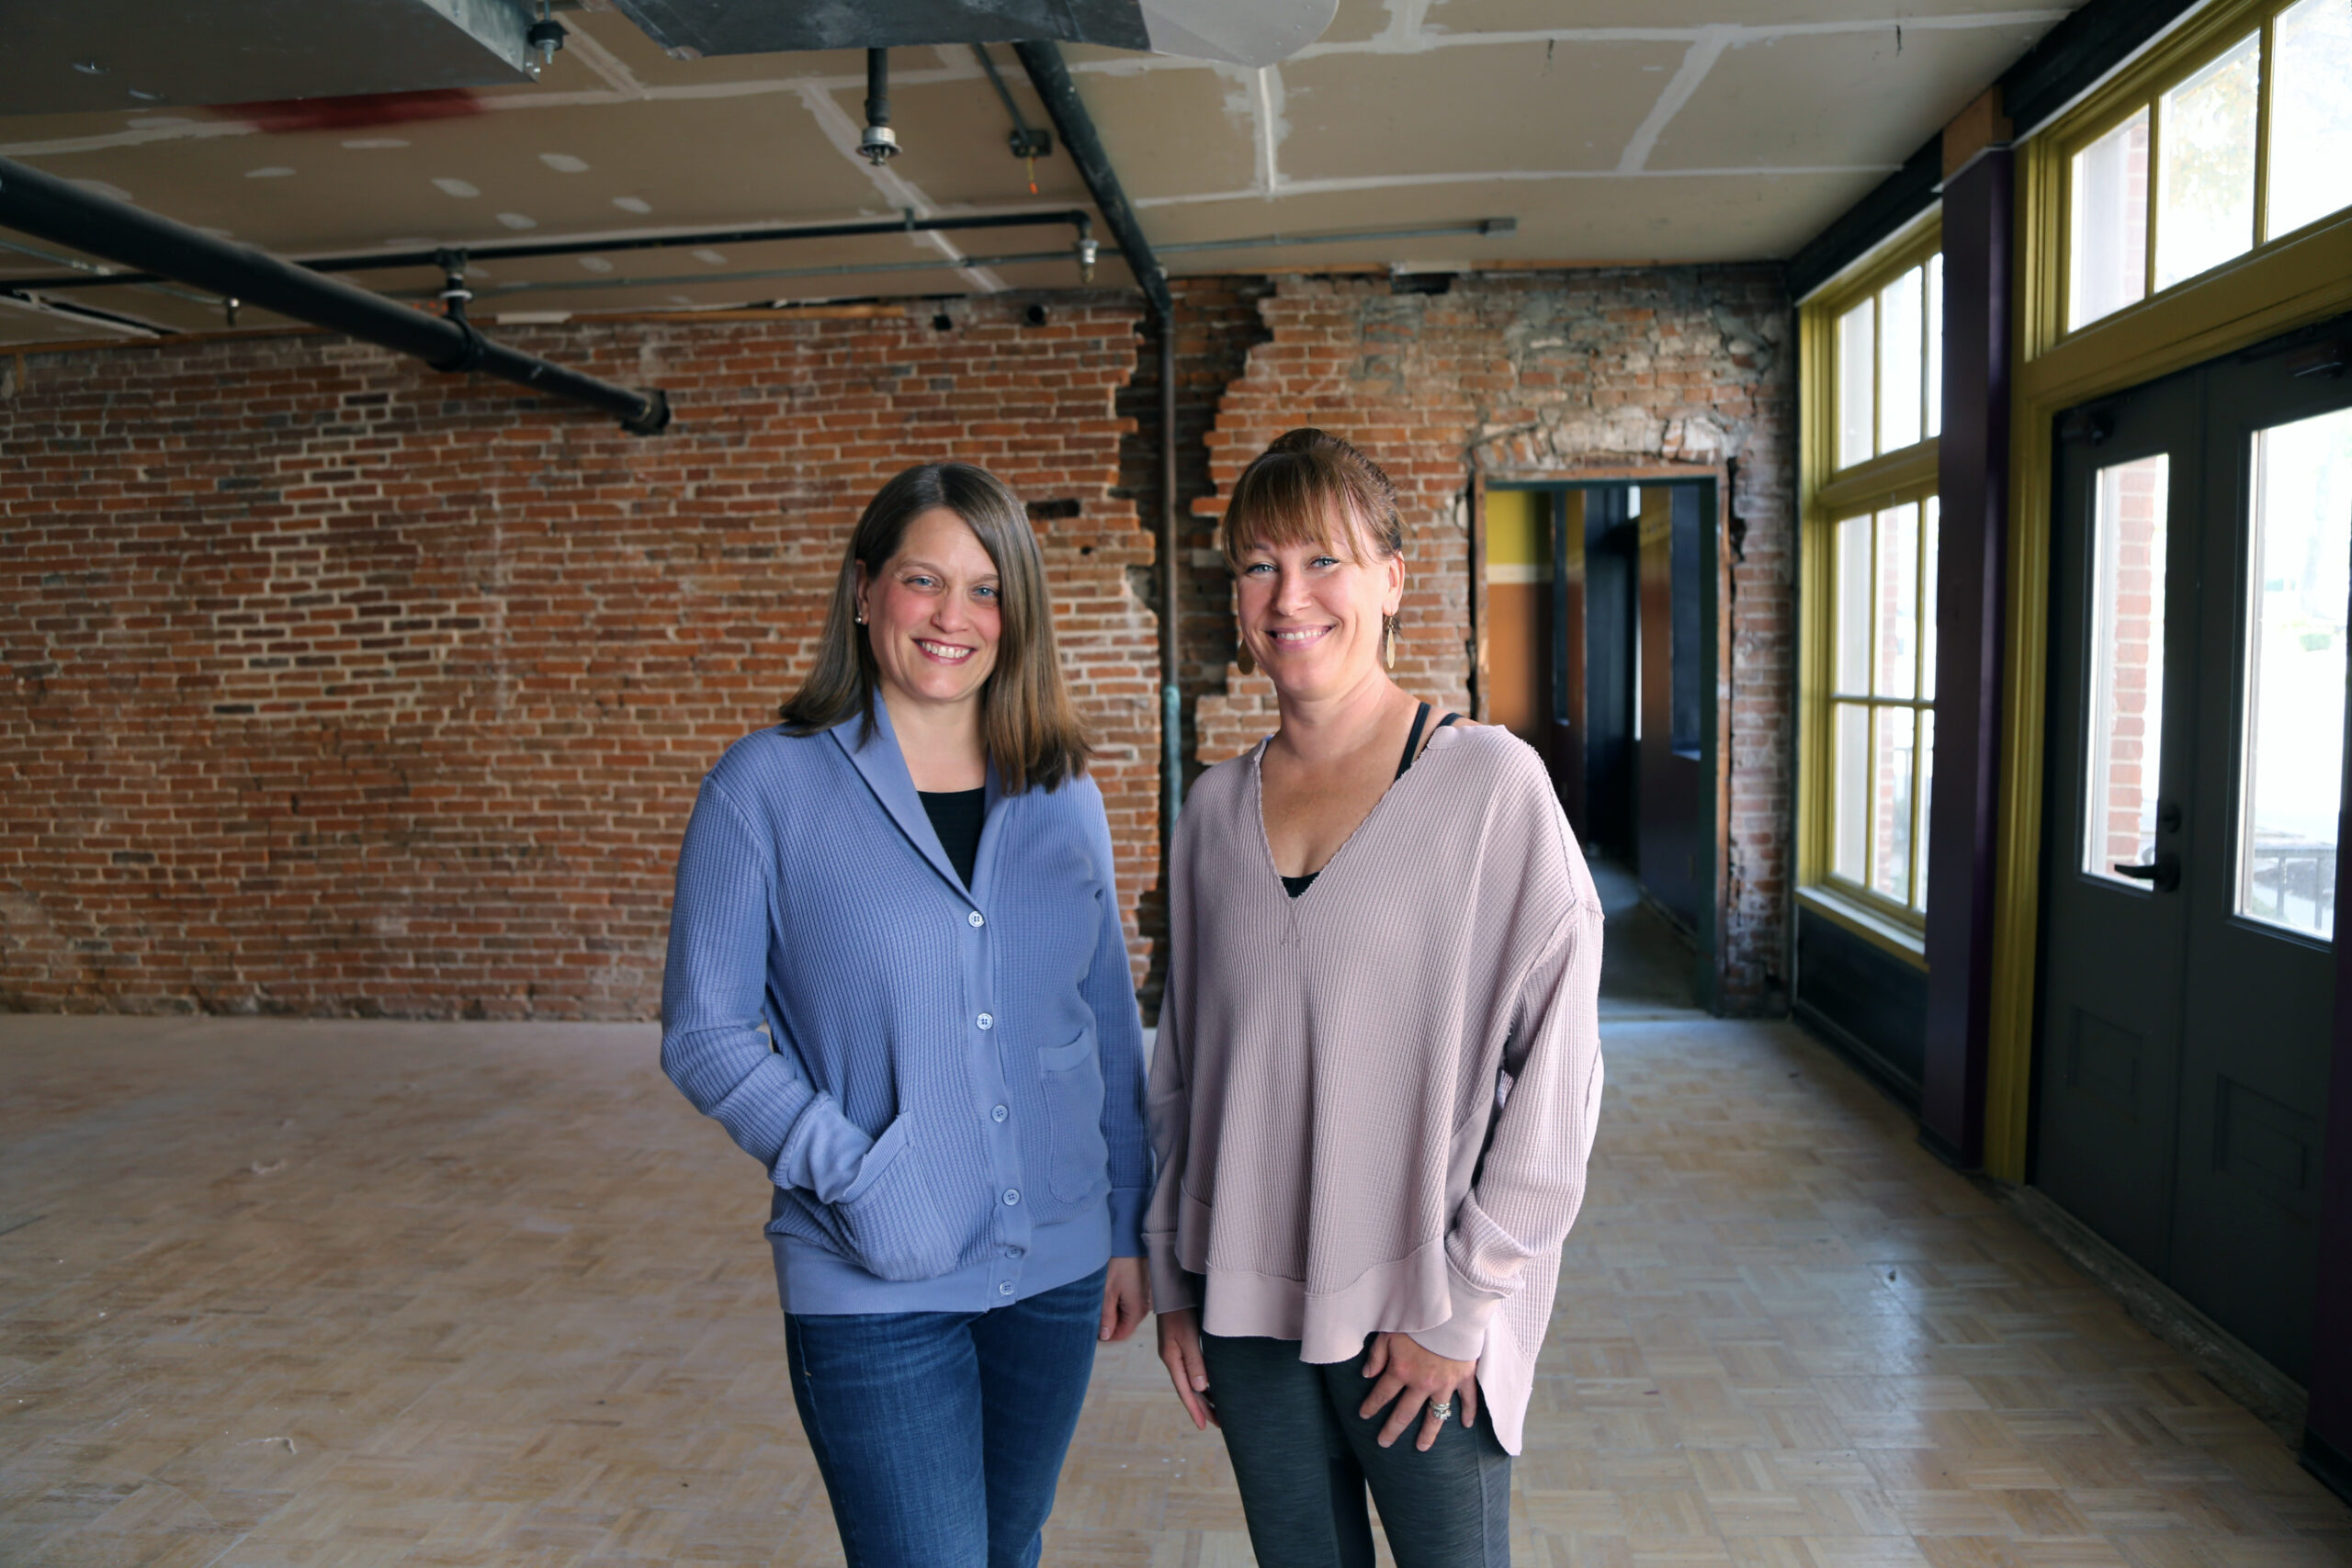 Beth Brown and Leslie Nolte are co-founders of ICON Arts Academy in Iowa City.